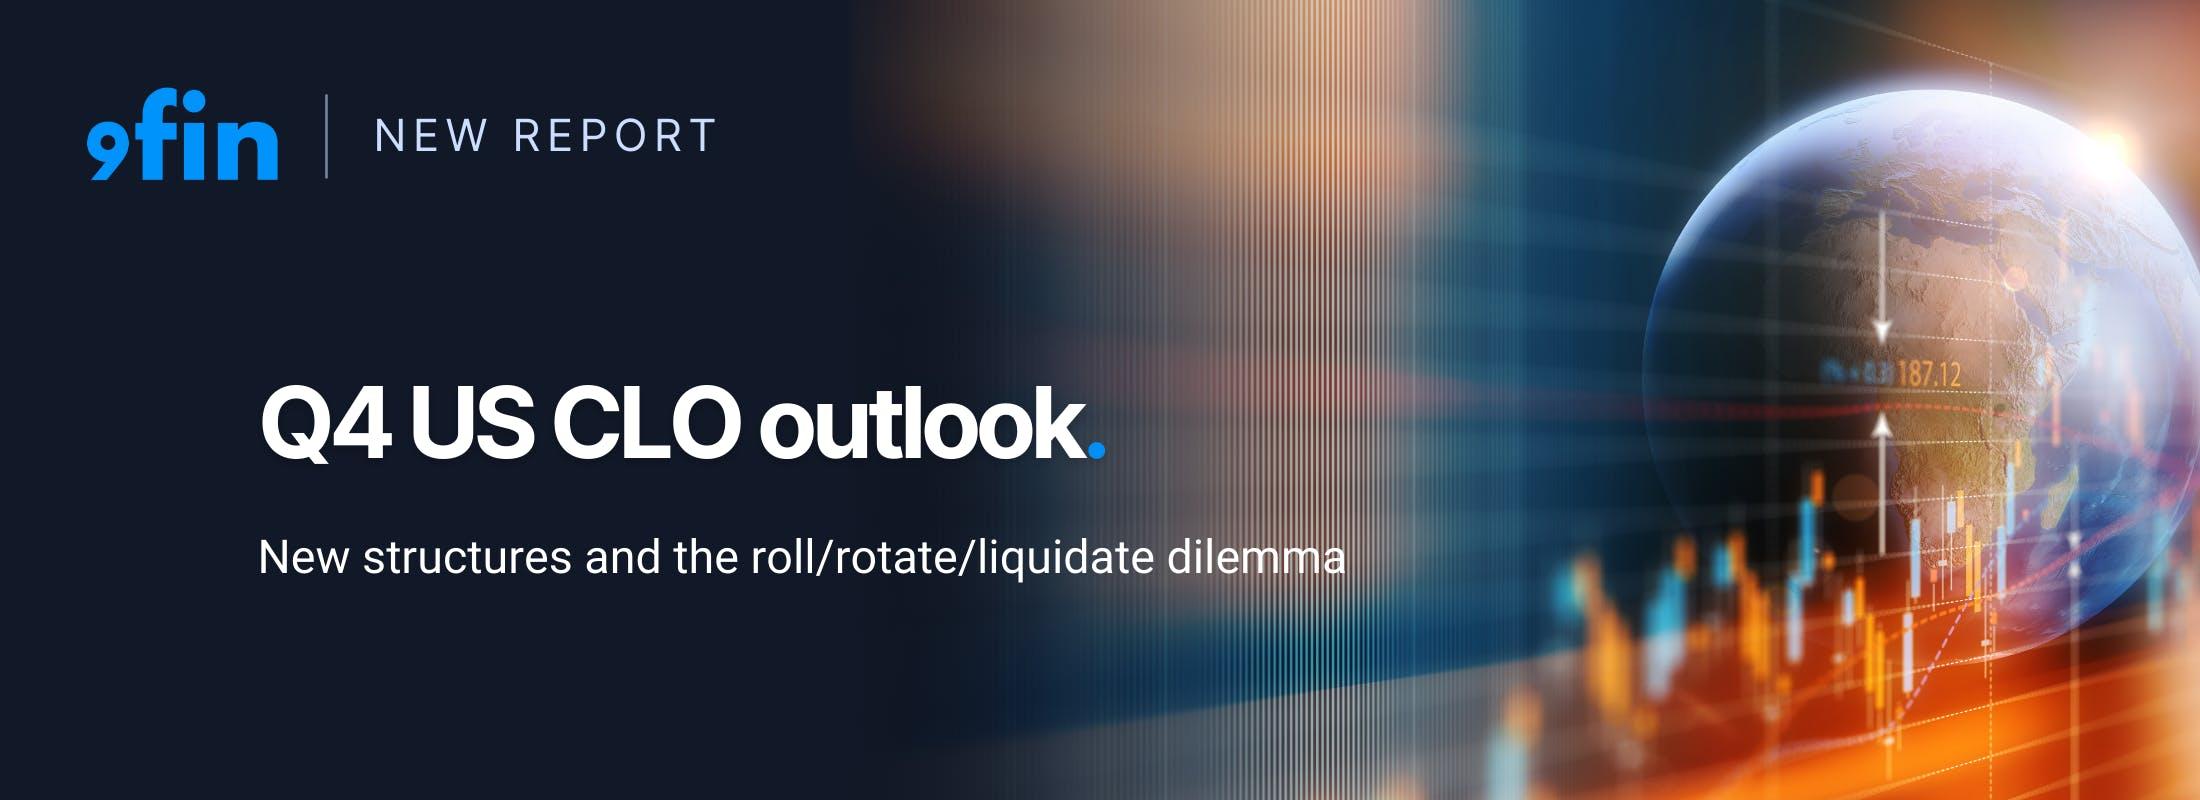 Q4 US CLO outlook — New structures and the roll/rotate/liquidate dilemma